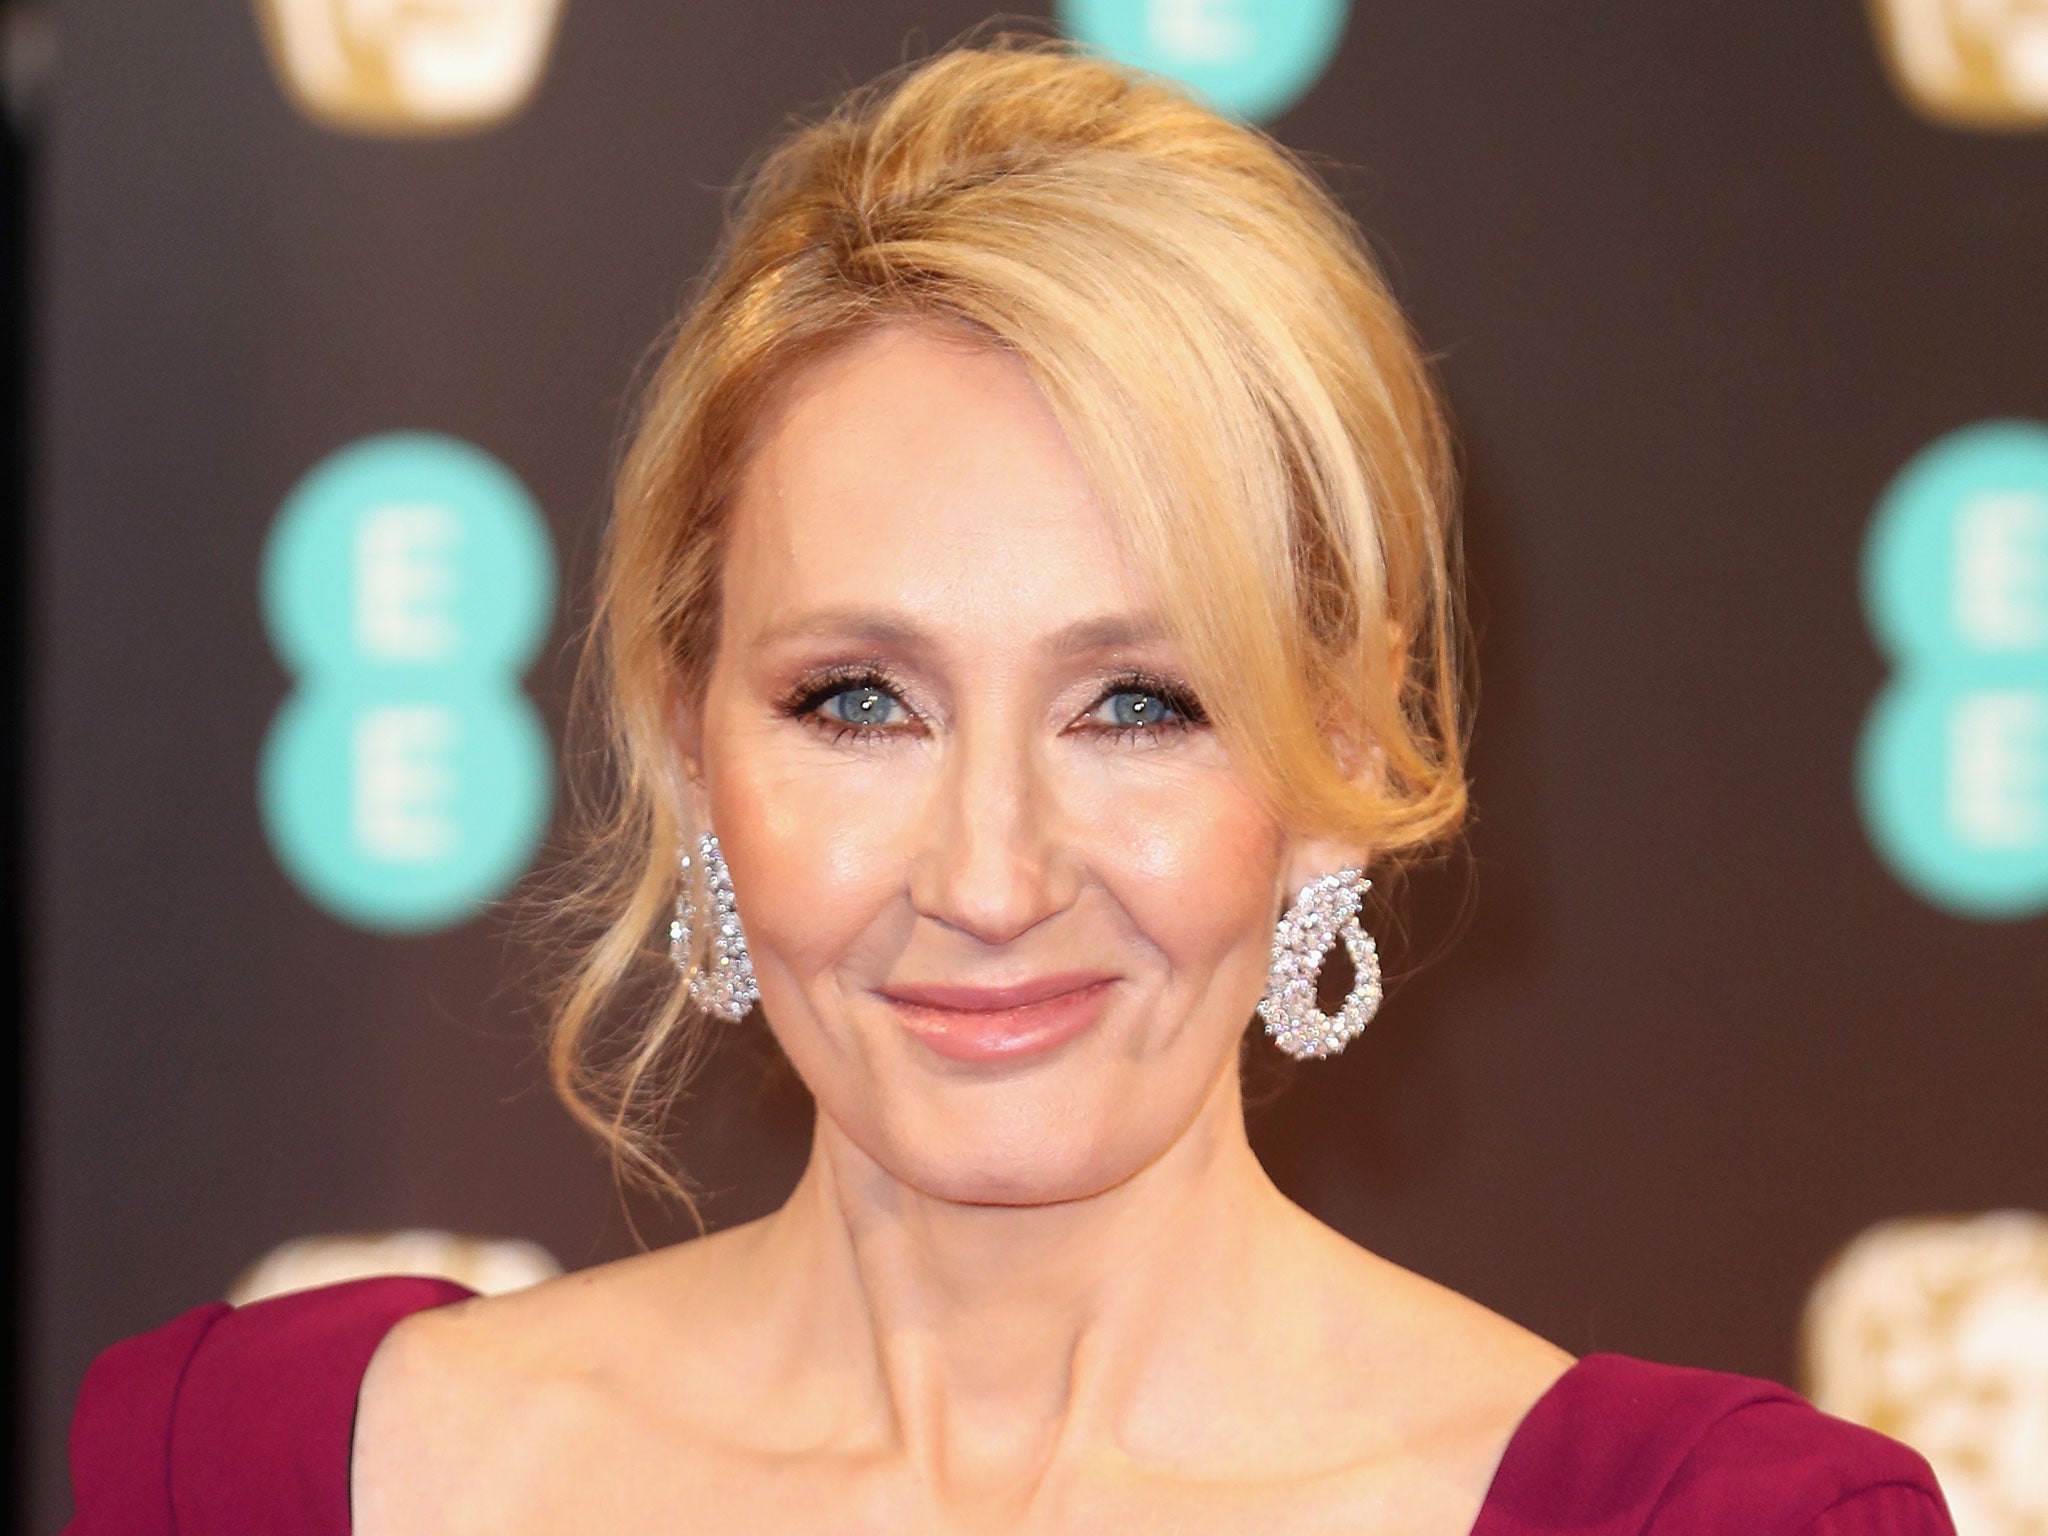 JK Rowling donates £15.3m to the University of Edinburgh for MS research